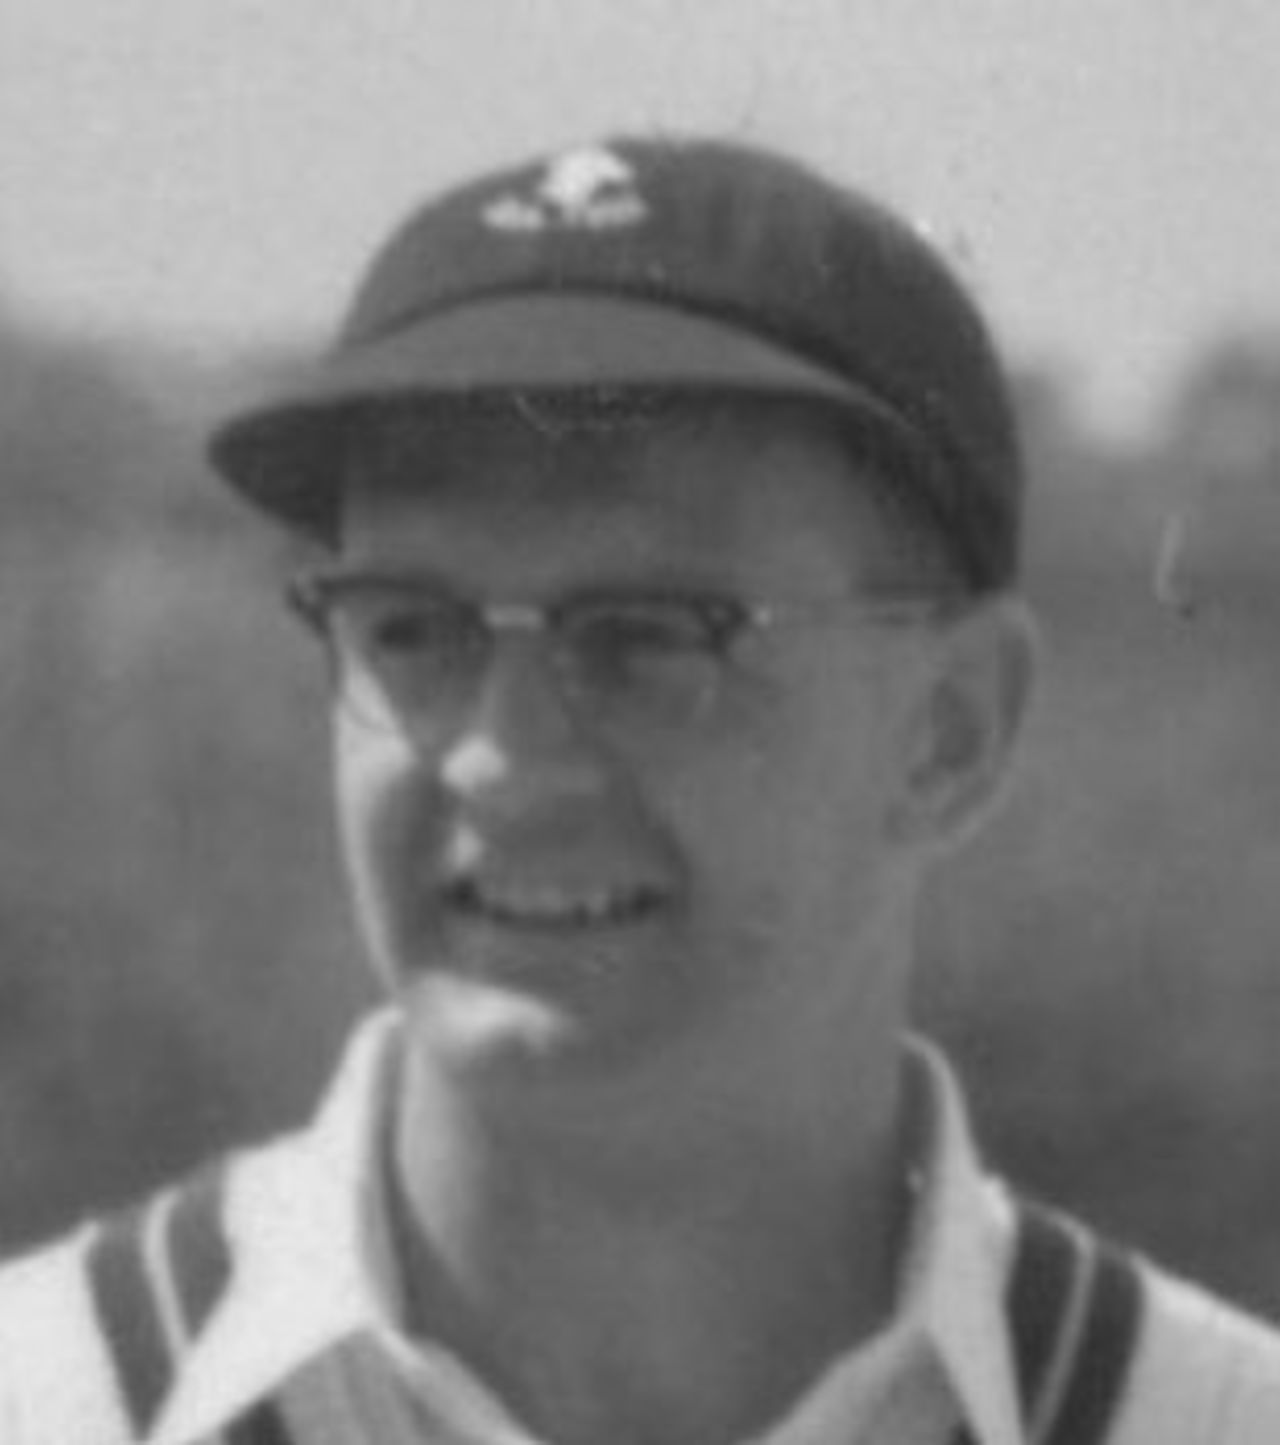 Paul Winslow pictured on the 1955 South Africa tour of England, May 14, 1955